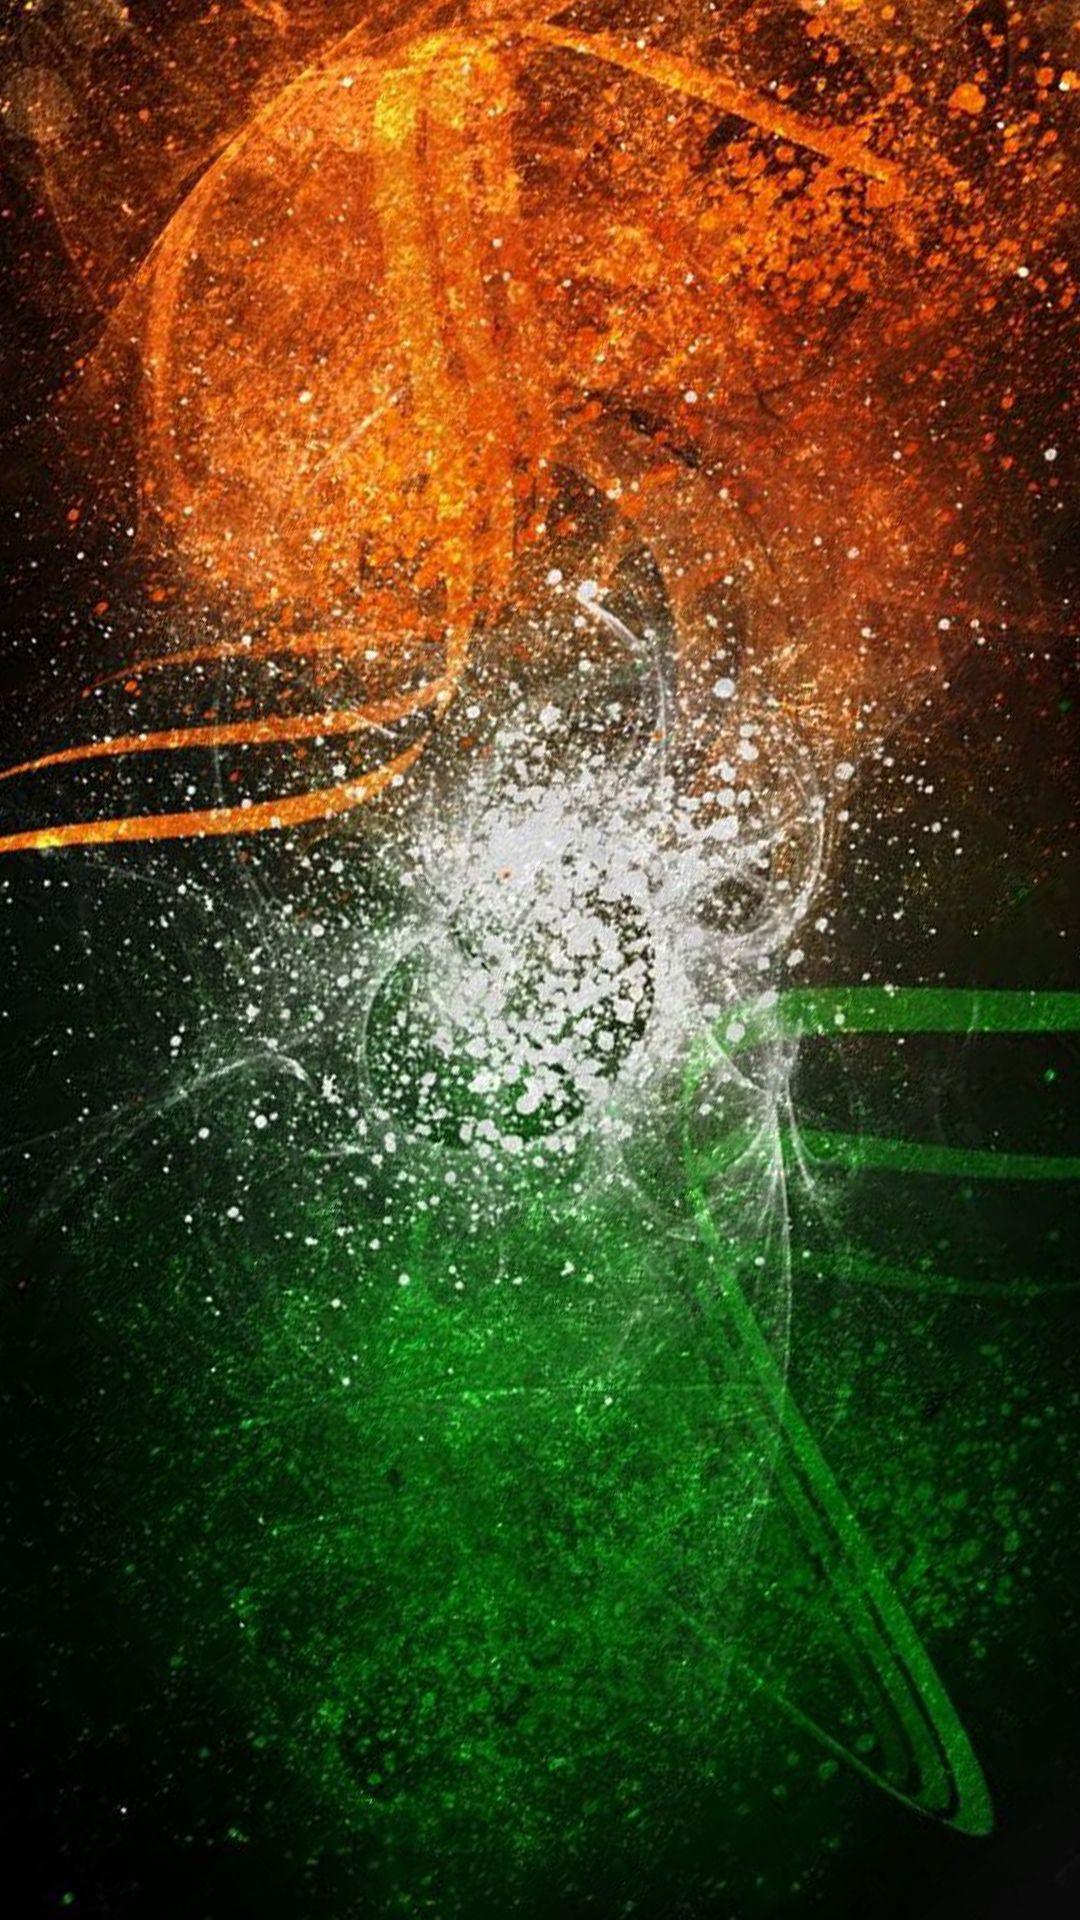 Free download of India Flag for Mobile Phone Wallpaper 17 of 17 Tricolor Wallpaper. Wallpaper Download. High Resolution Wallpaper